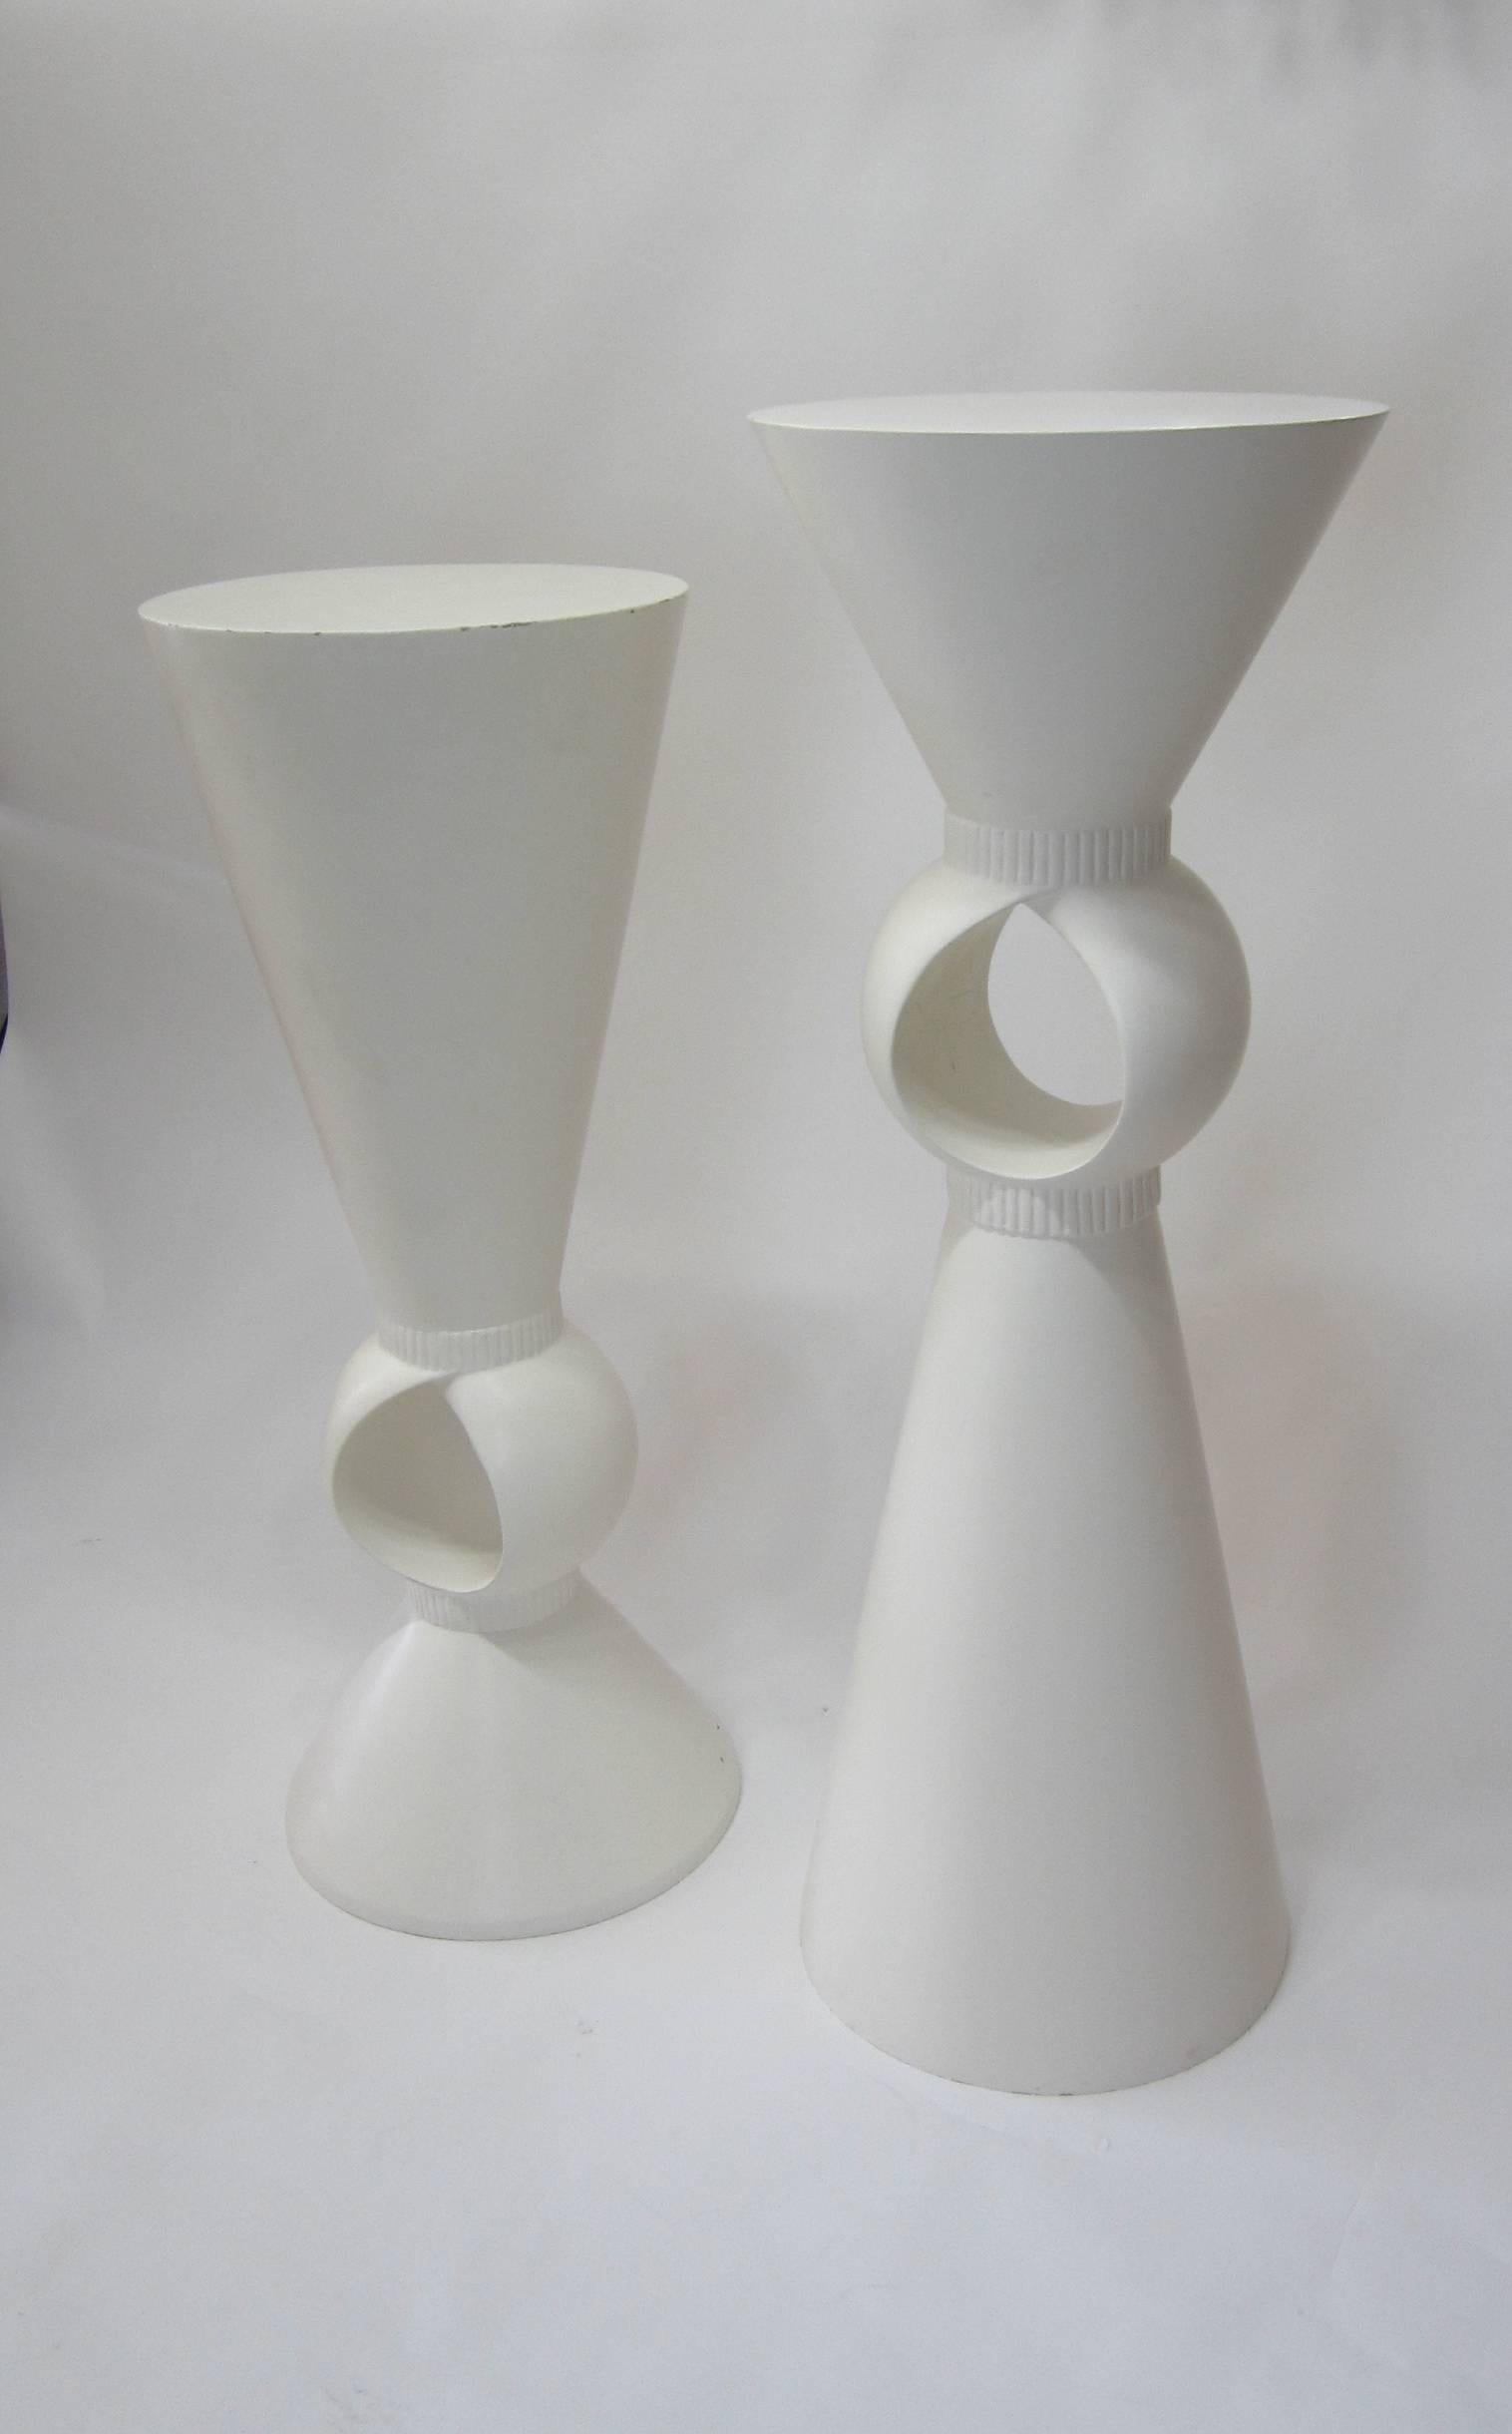 Pair of pedestals measuring forty two inches and forty seven inches tall respectively. Made of composition wood and finished in matte white. The interiors of the hollow centers have a white crackling finish. Great to display art, sculpture,